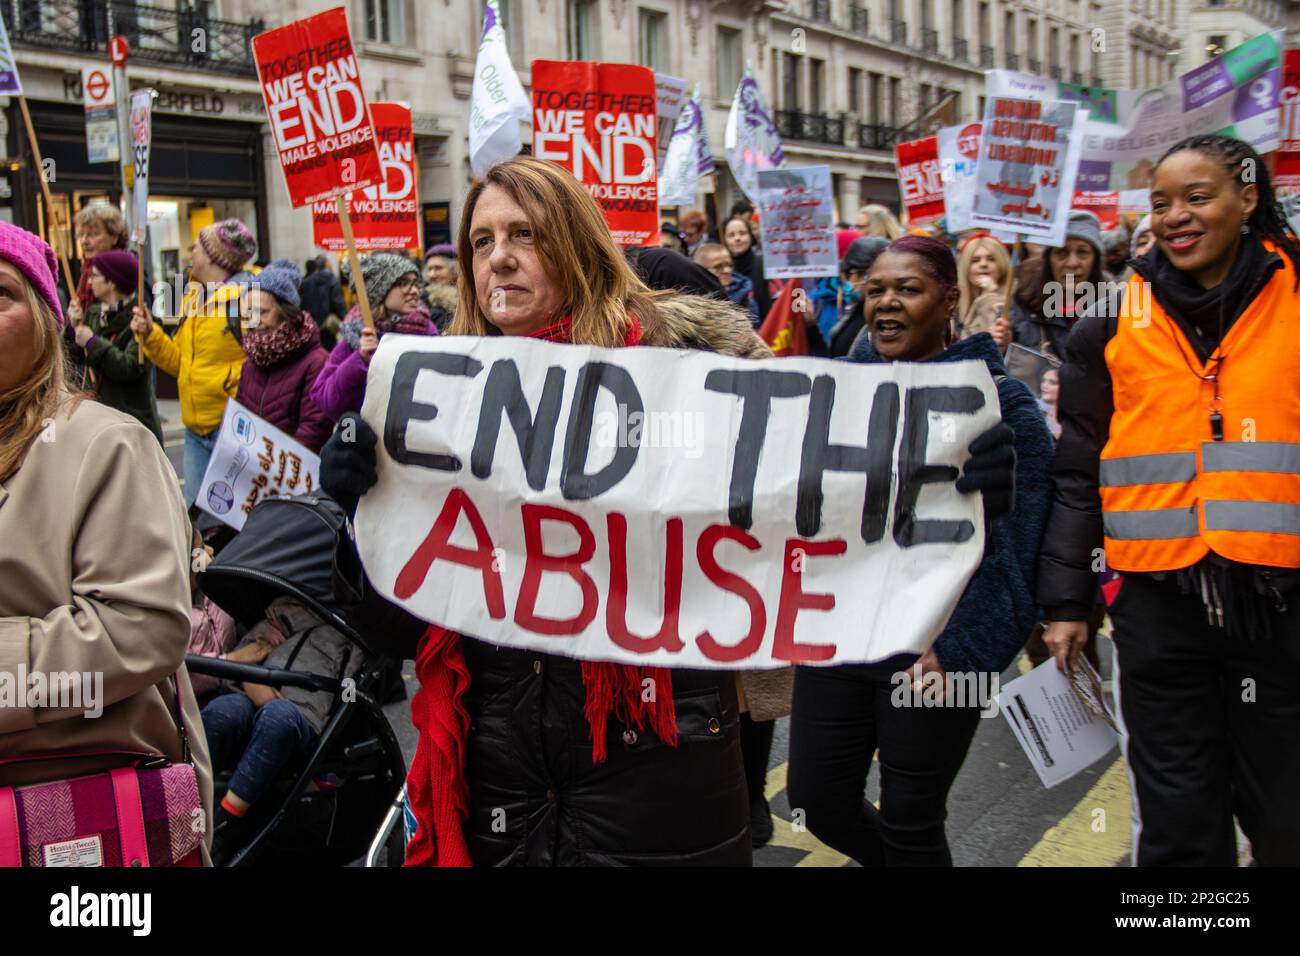 London, UK - March 4, 2023: Thousands of women marched in central London towards Trafalgar Square in protest against male violence and for gender equality. The march and rally were part of the annual Million Women Rise event held to commemorate International Women's Day. Credit: Sinai Noor/Alamy Live News Stock Photo